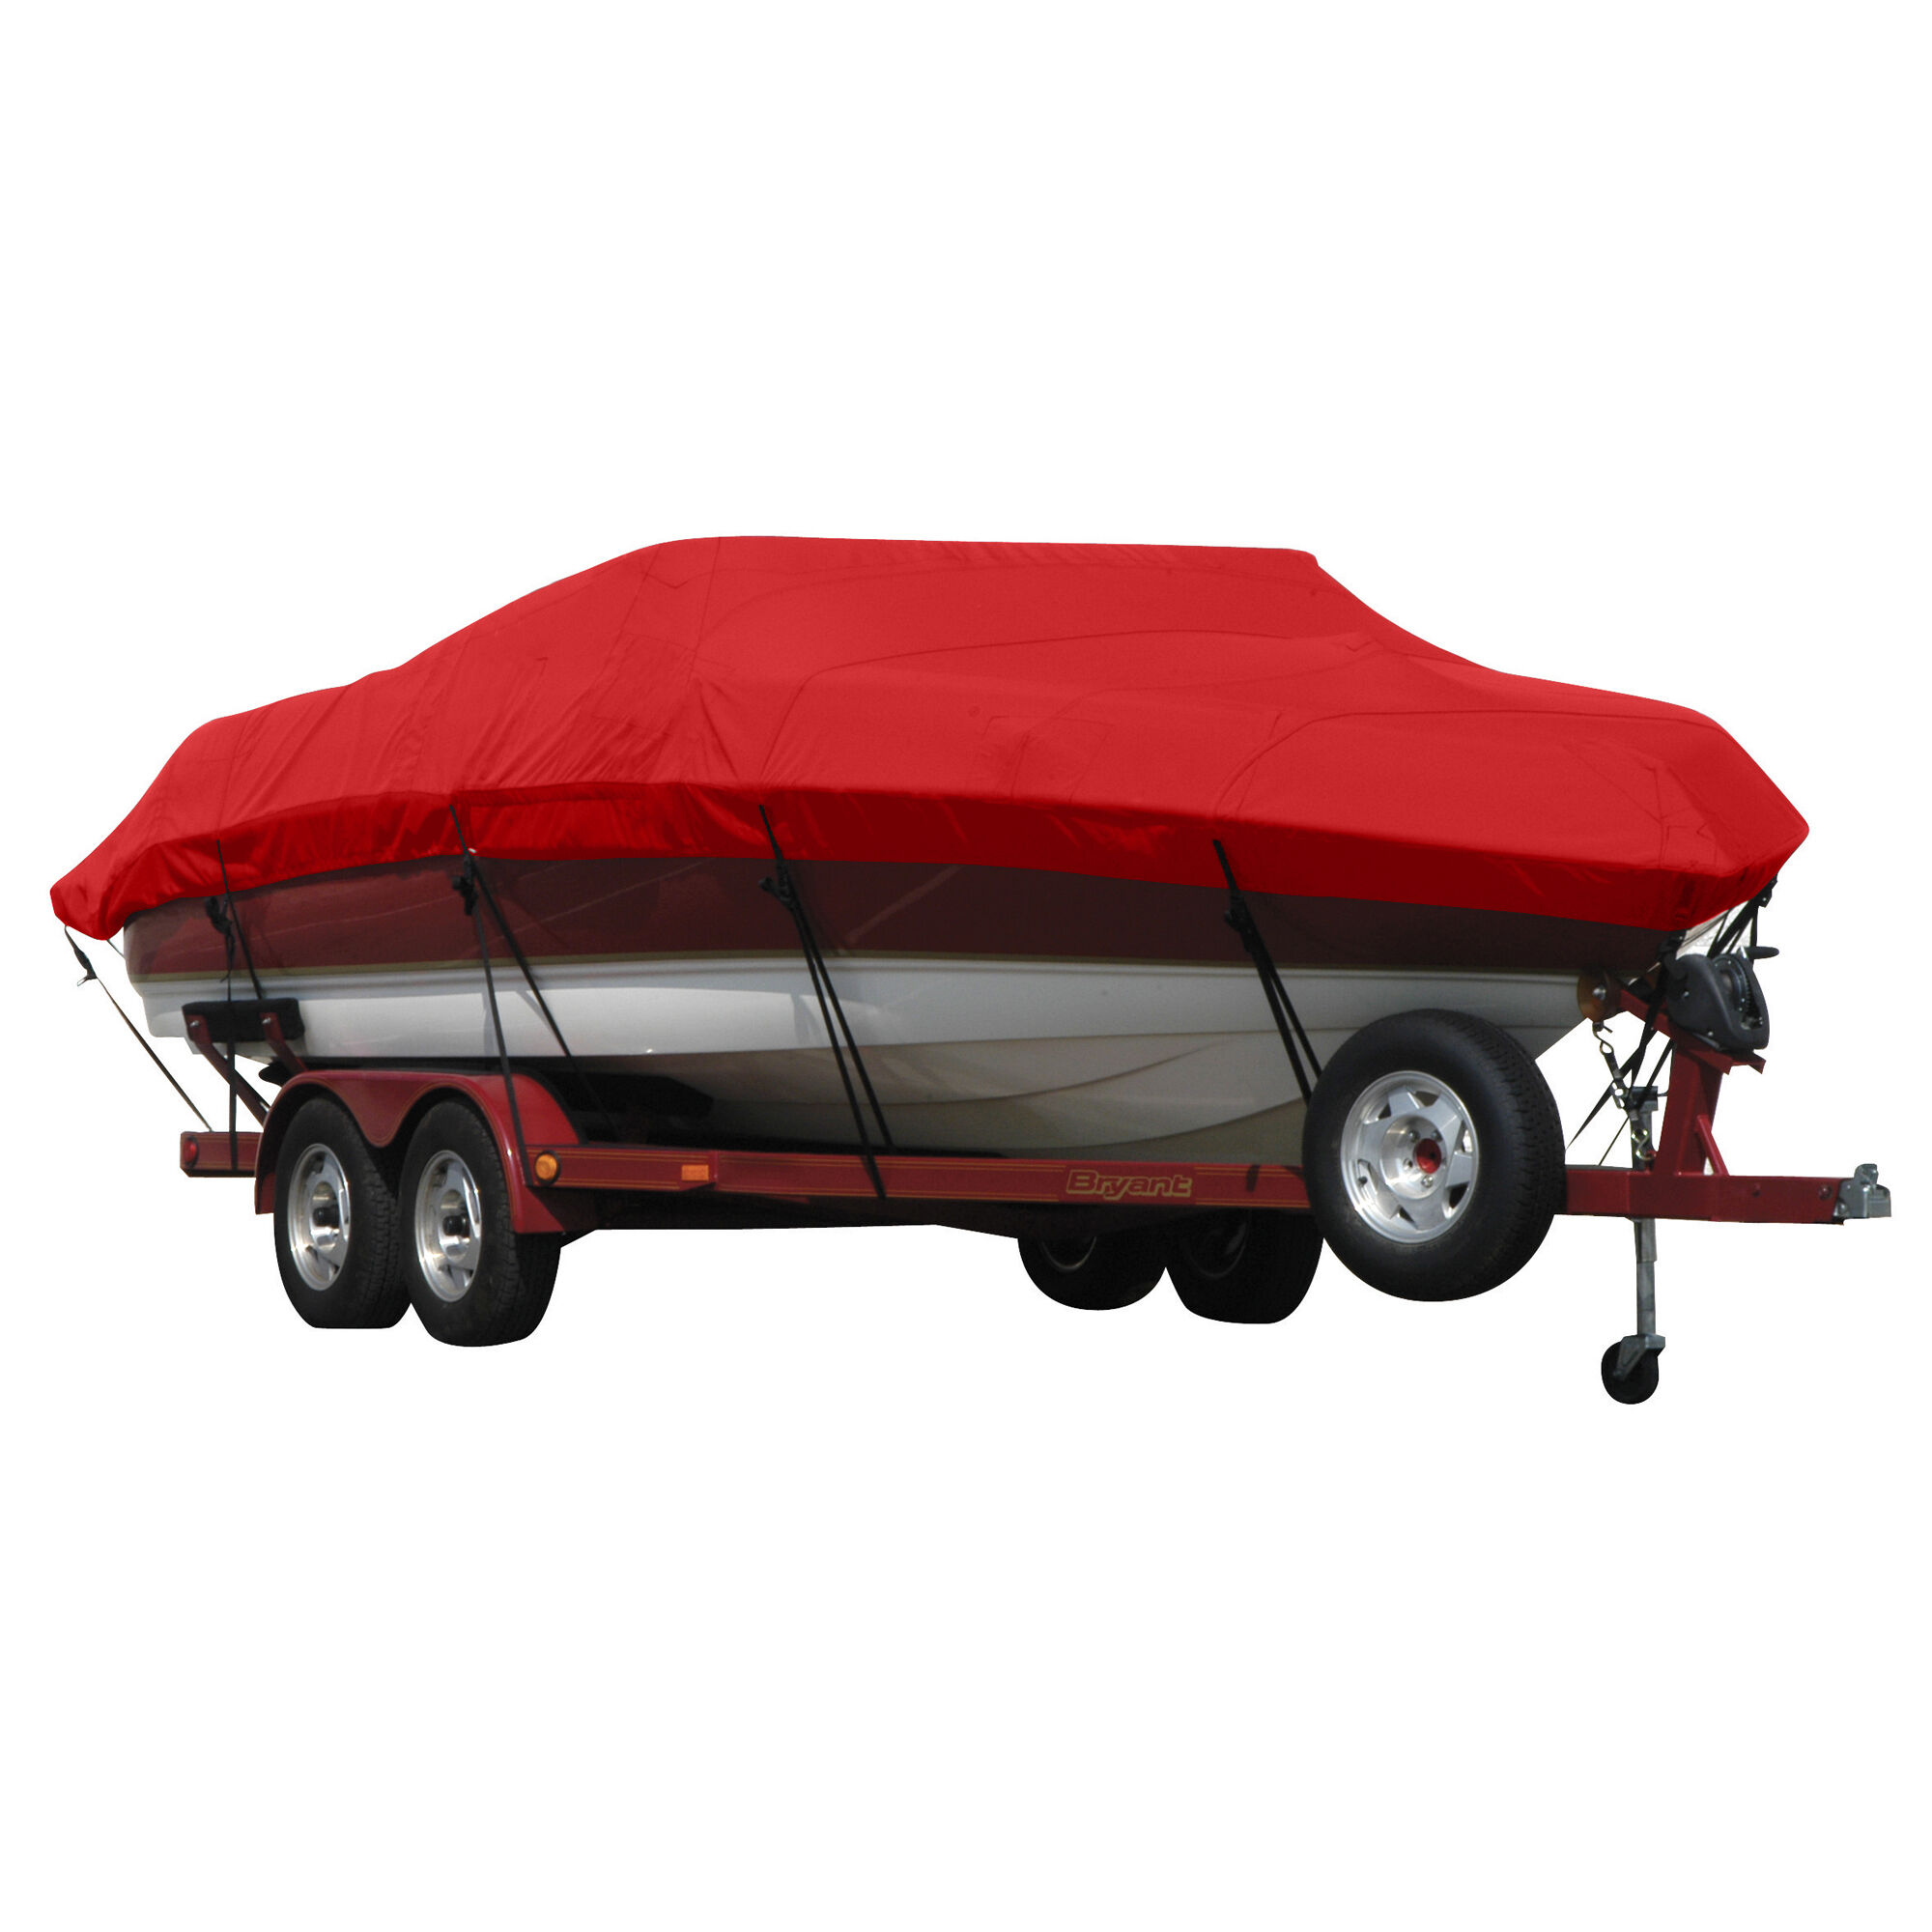 Covermate Exact Fit Sunbrella Boat Cover for Four Winns 220 Br 220 Bowrider w/ Factory Stainless Tower Low Plexy Windshield I/O. Jockey Red